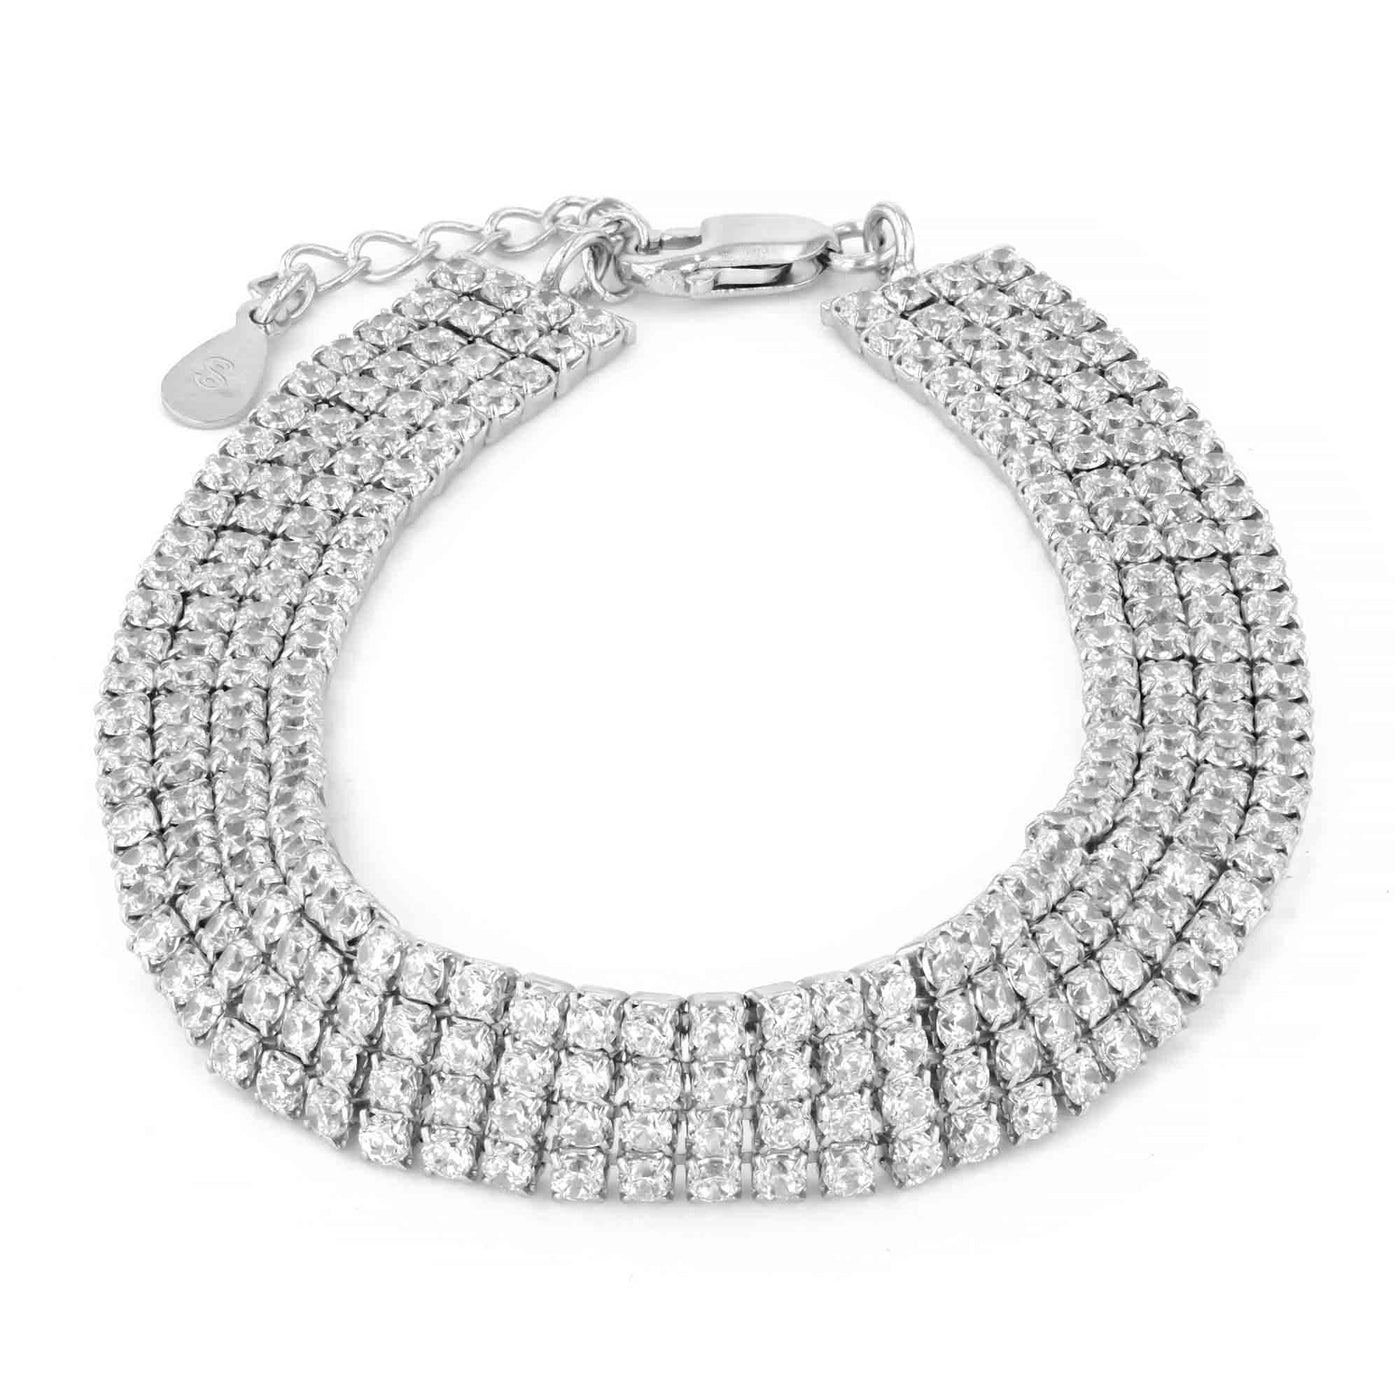 Rebecca Sloane Sterling Silver Four Row Bracelet With CZ